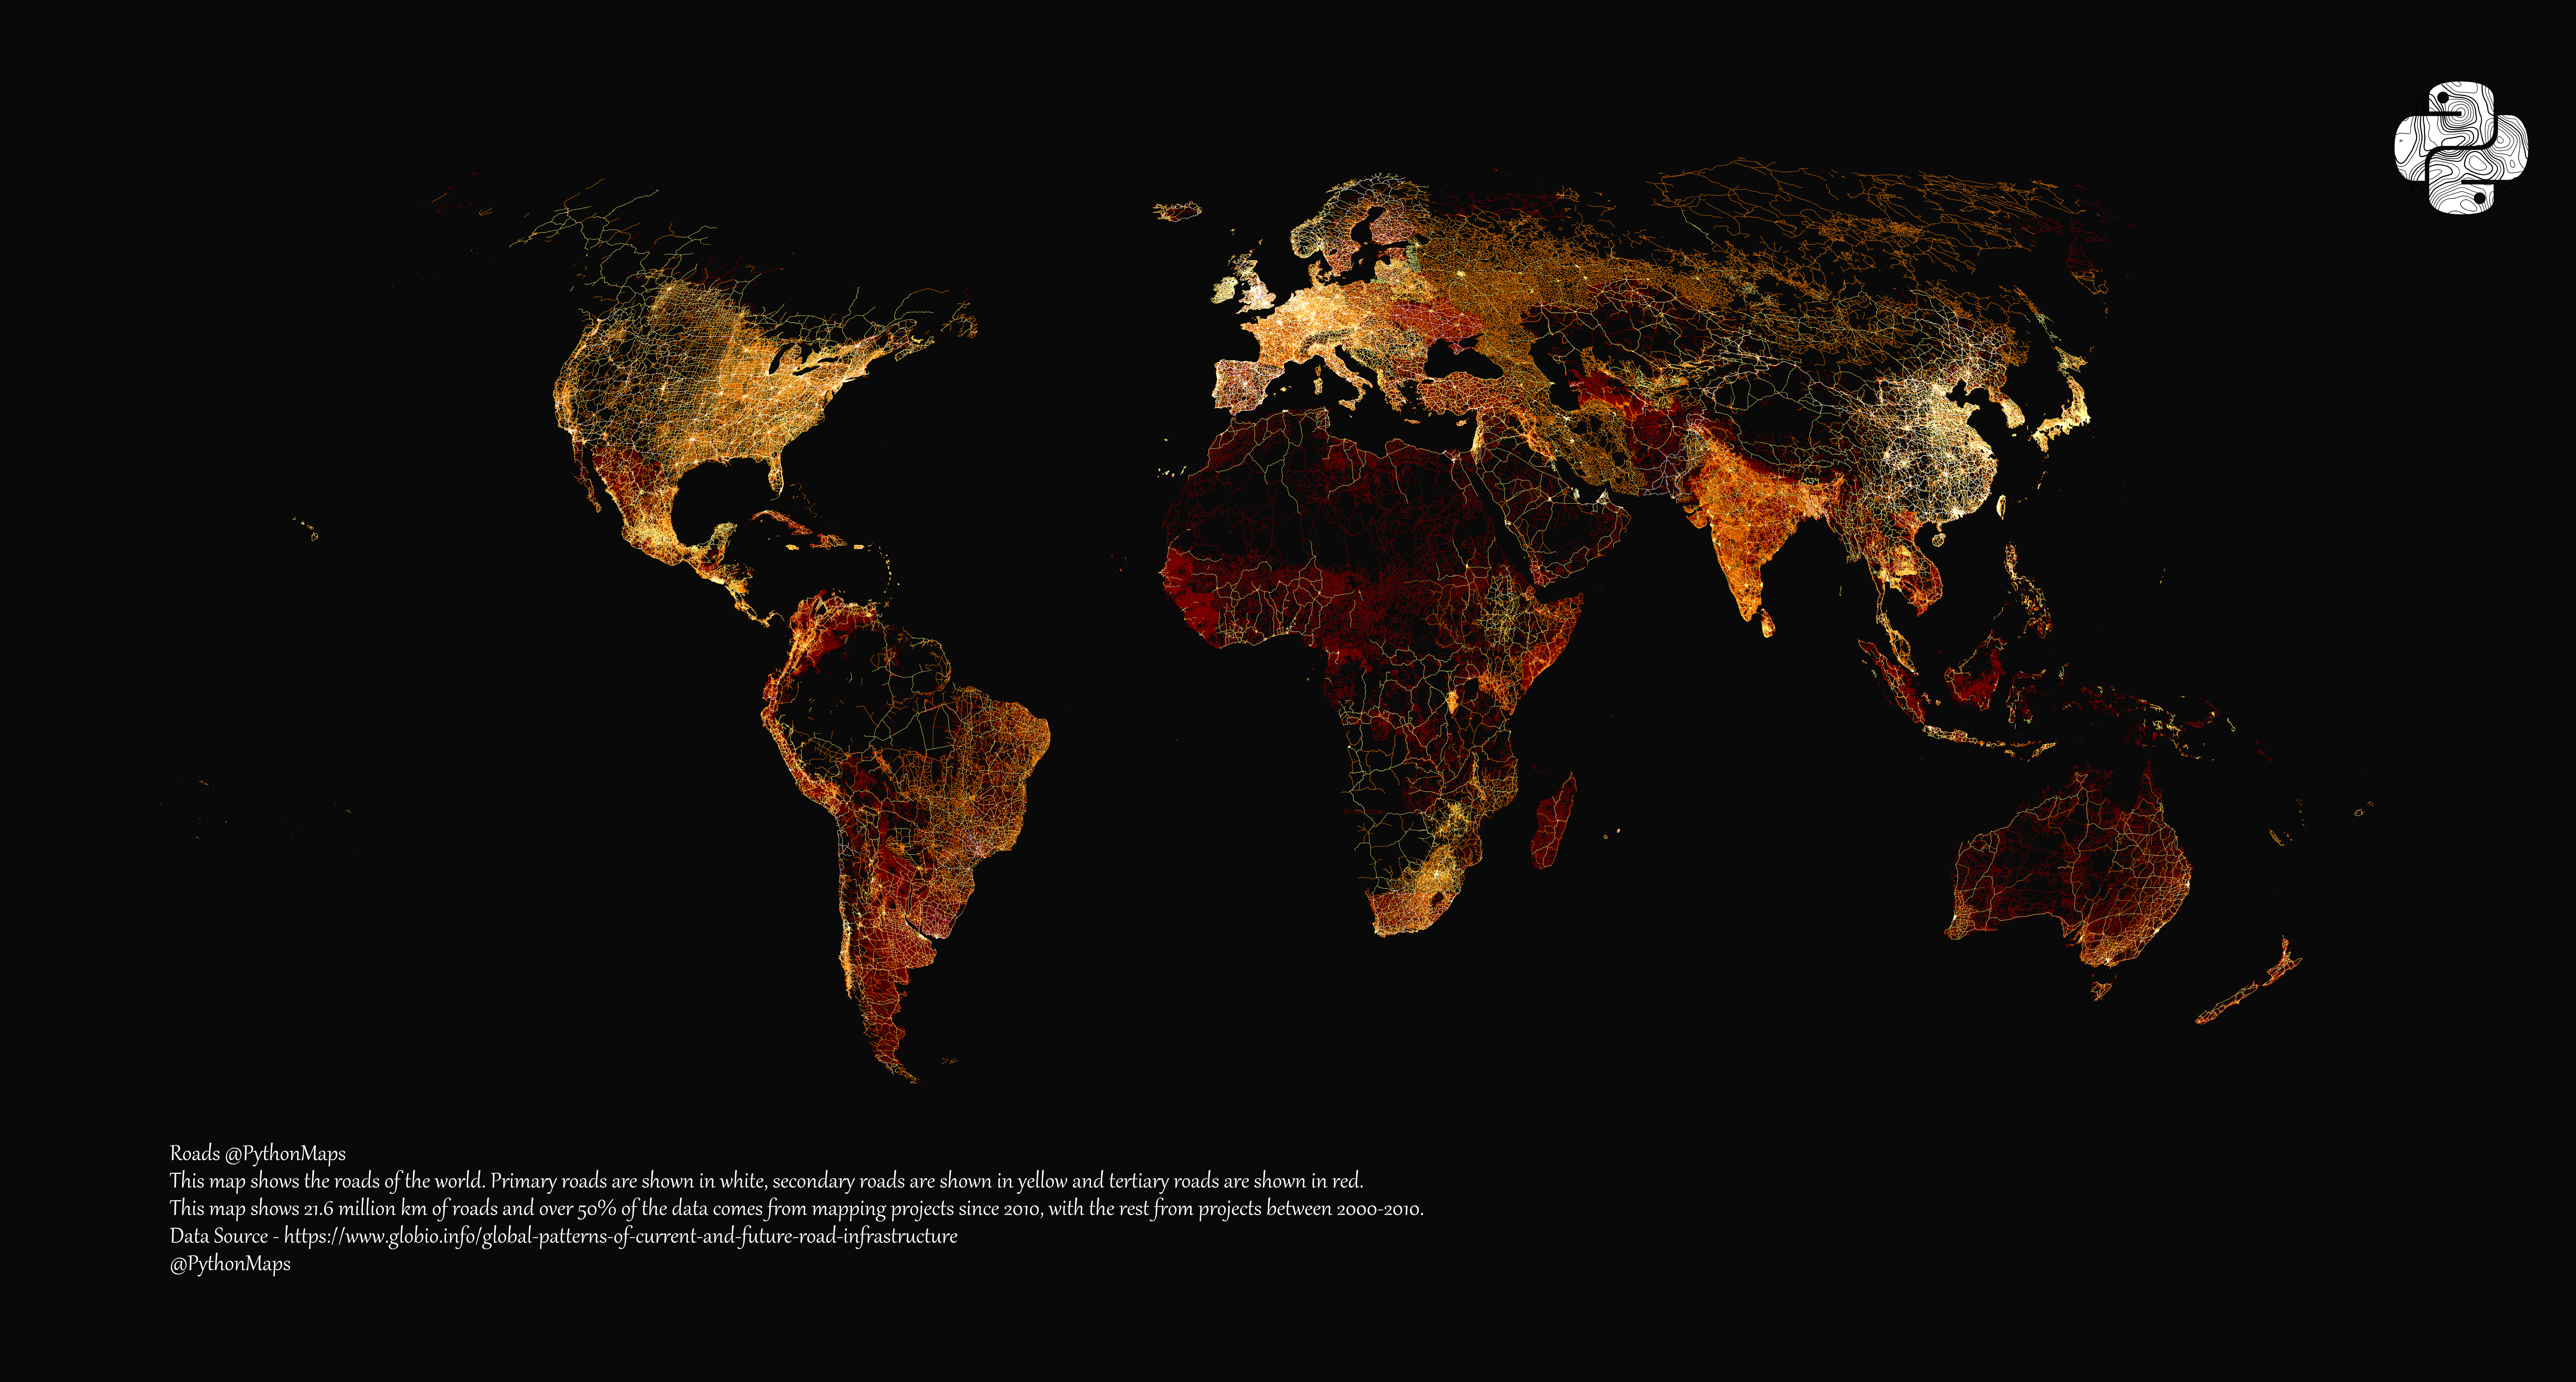 A map of the world's roads, visualised by type.